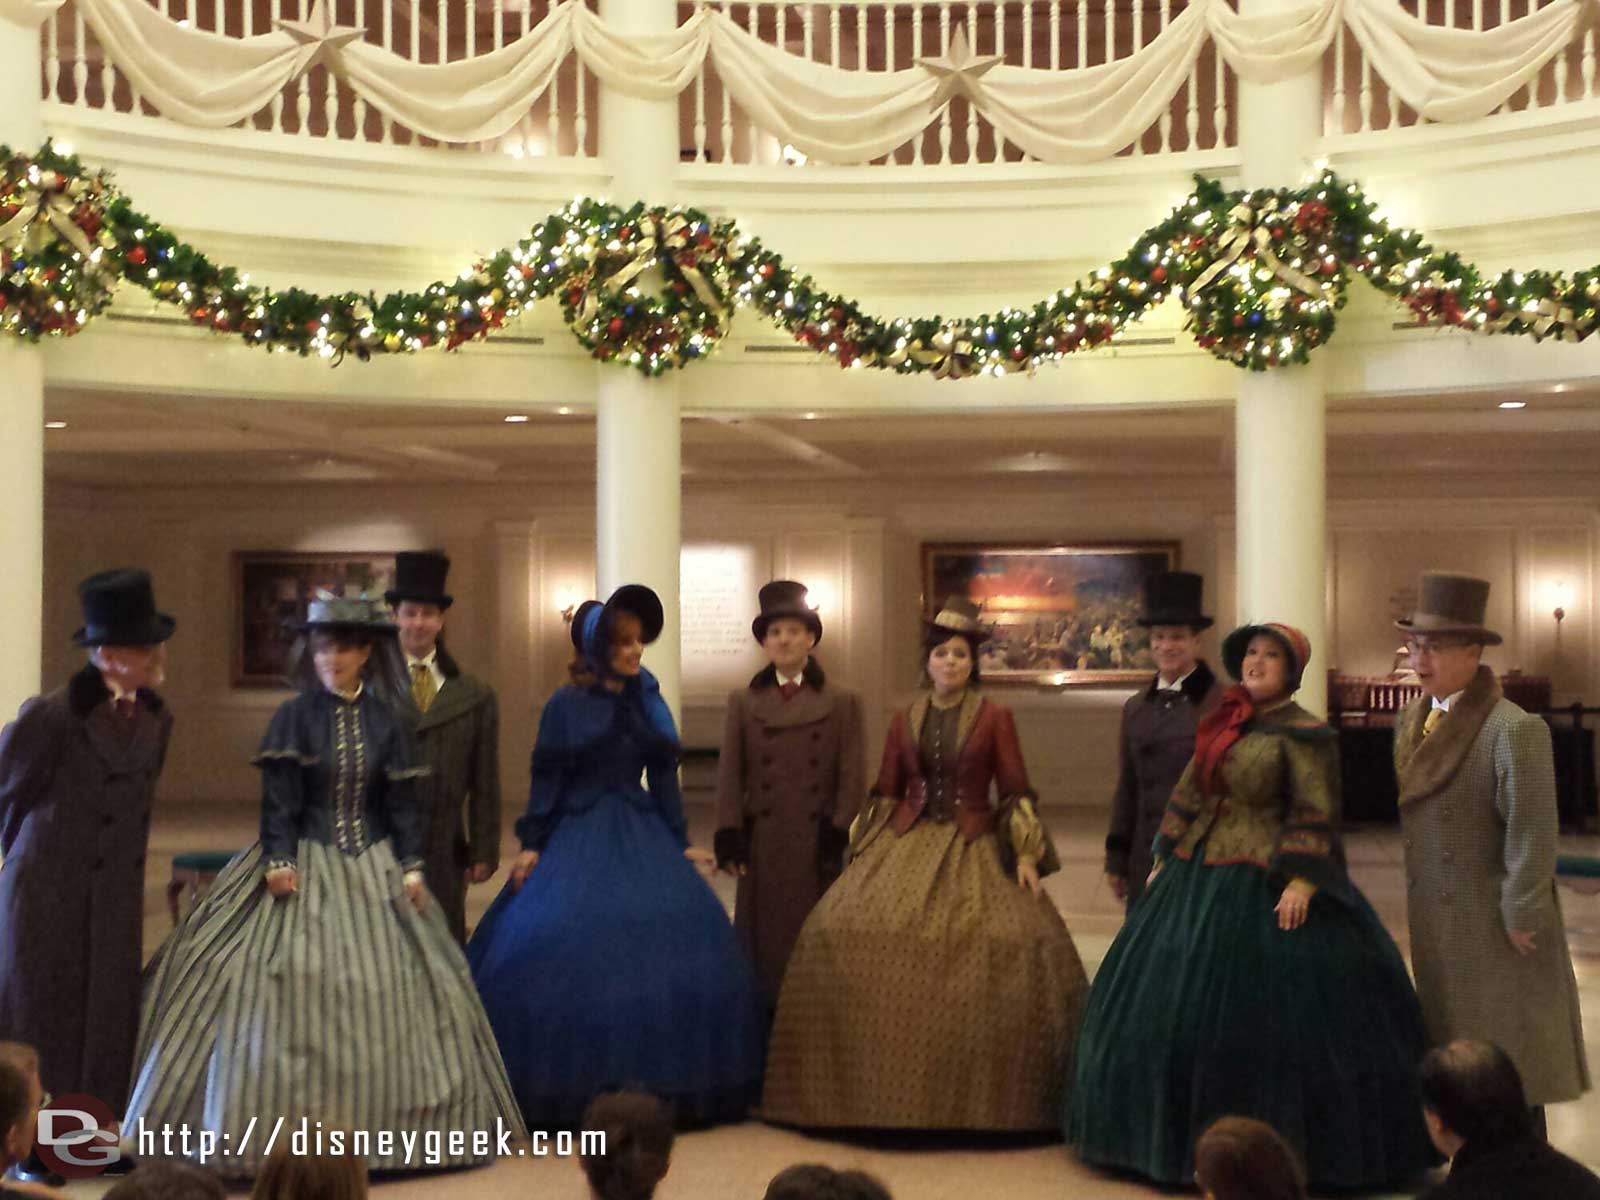 The Voices of Liberty performing in the American Adventure Lobby.